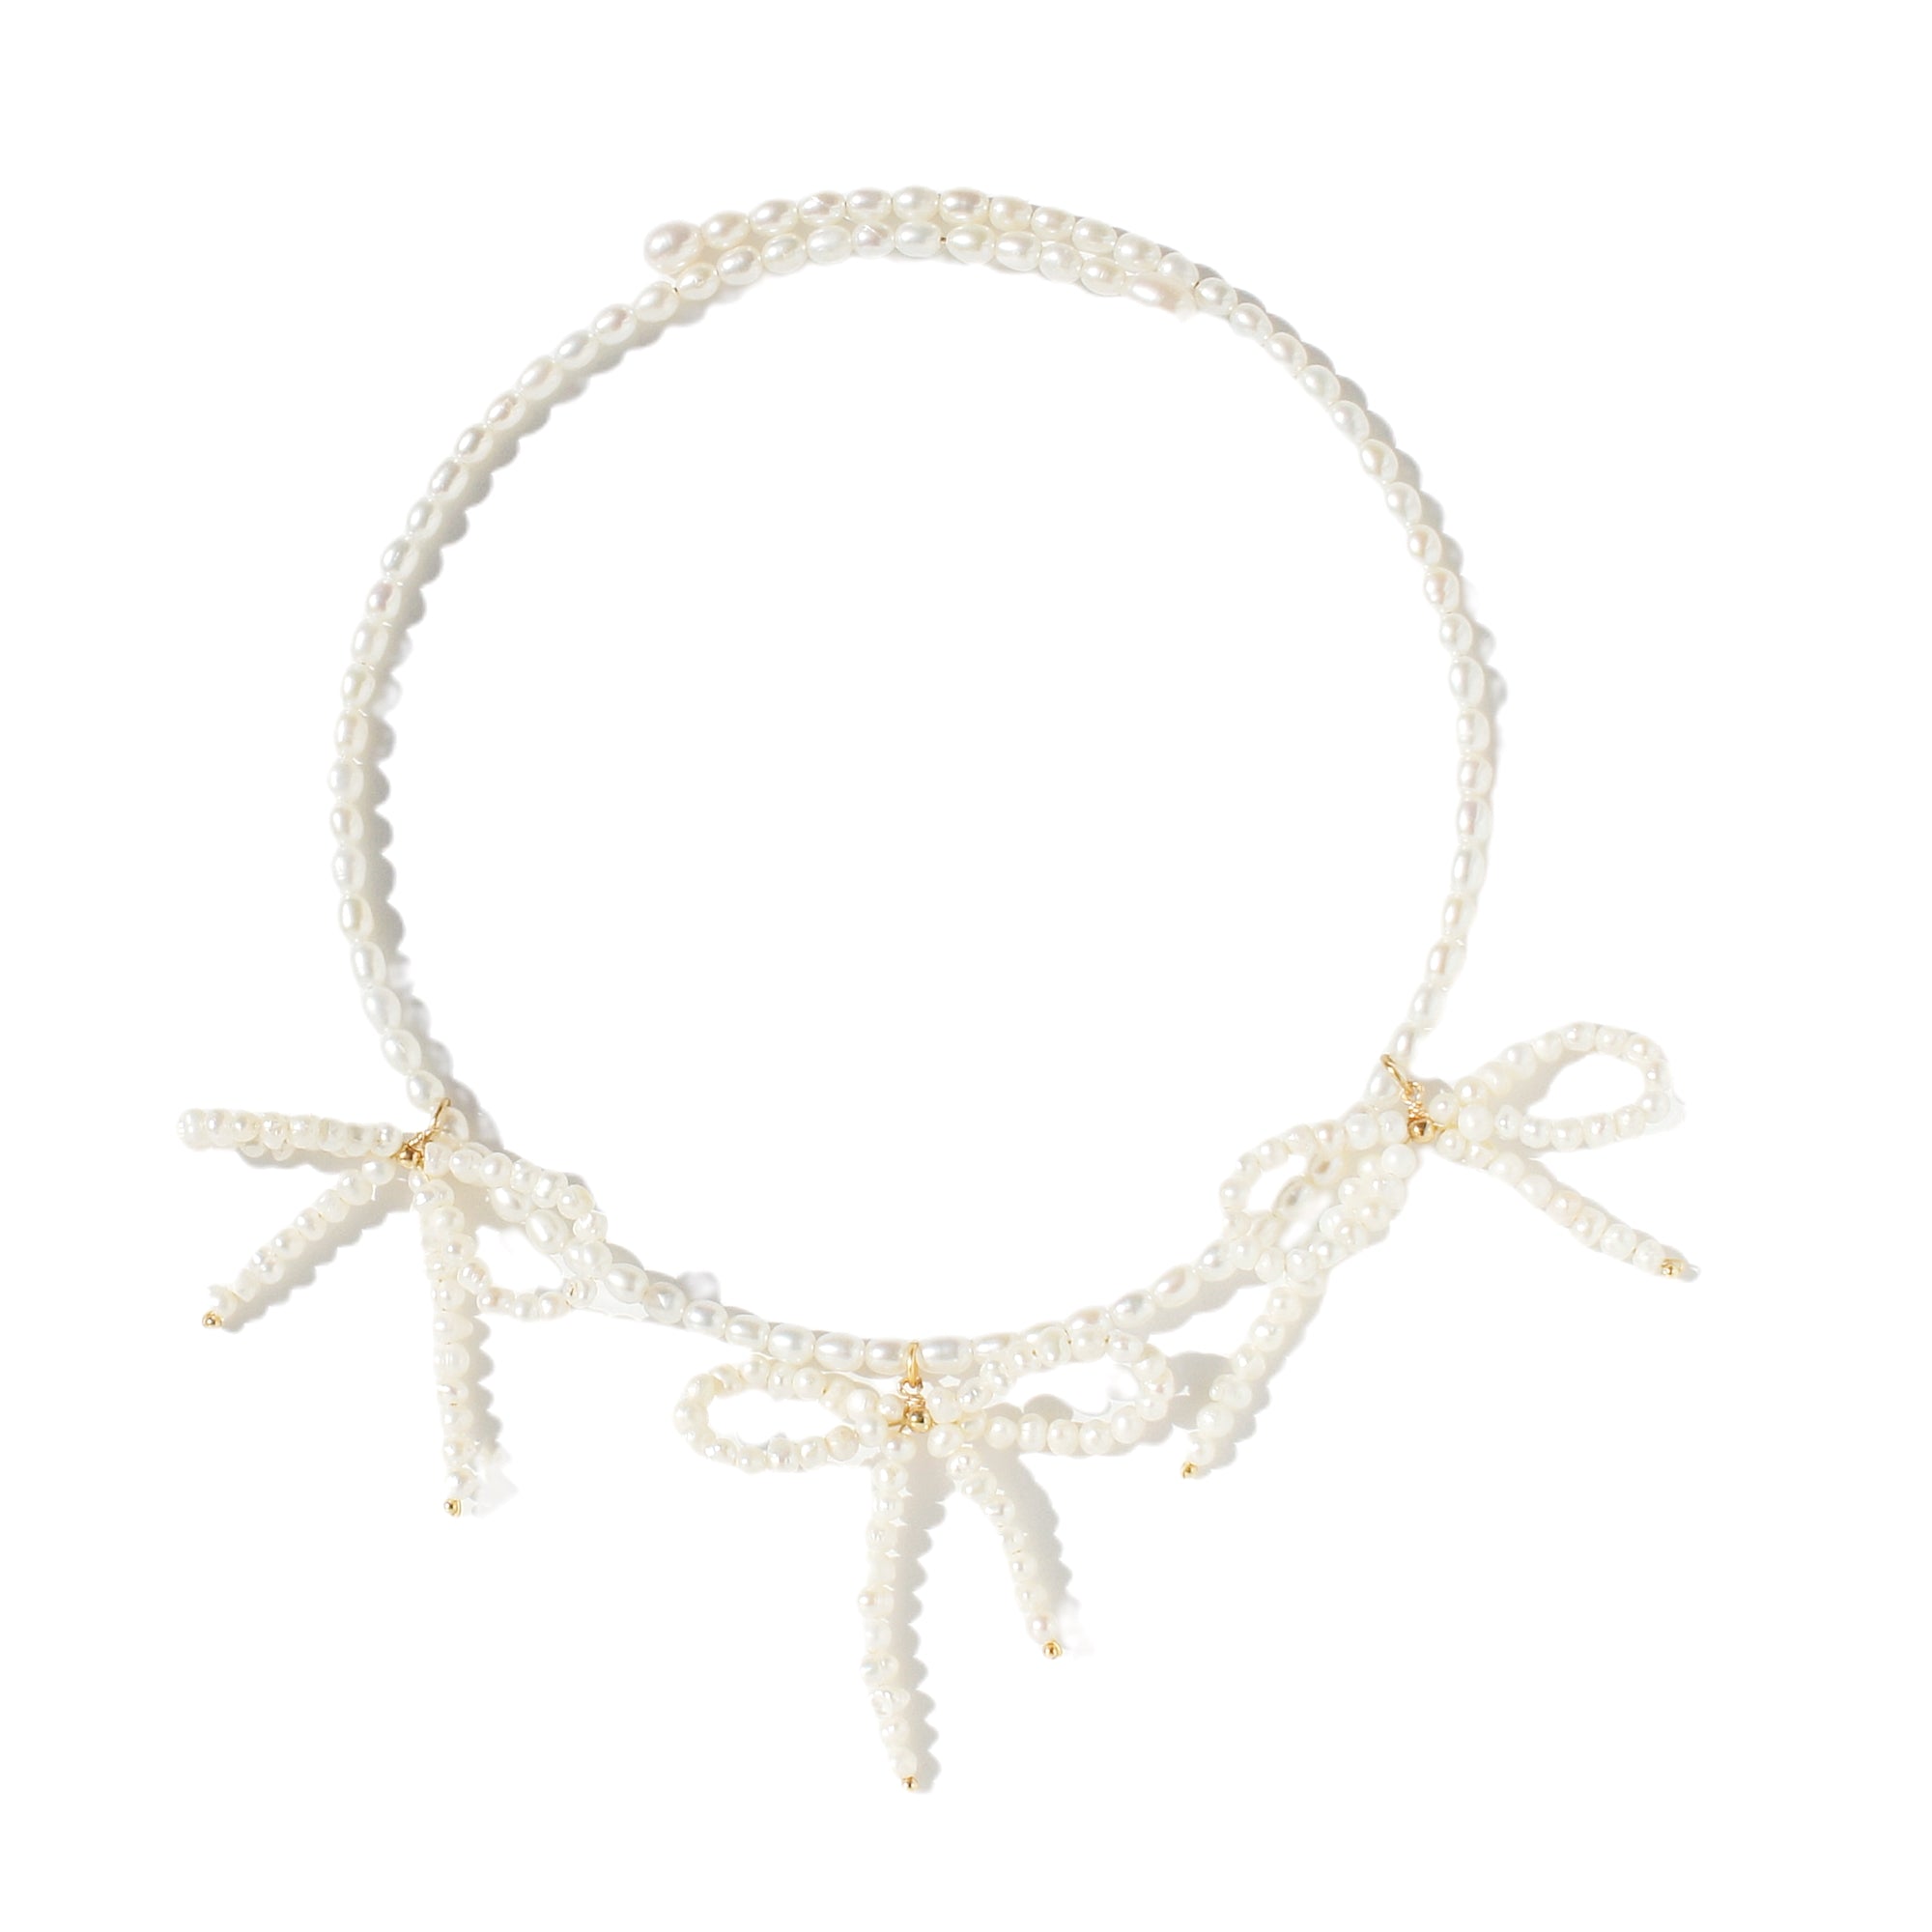 Freshwater Pearl Choker with Pearl Bows